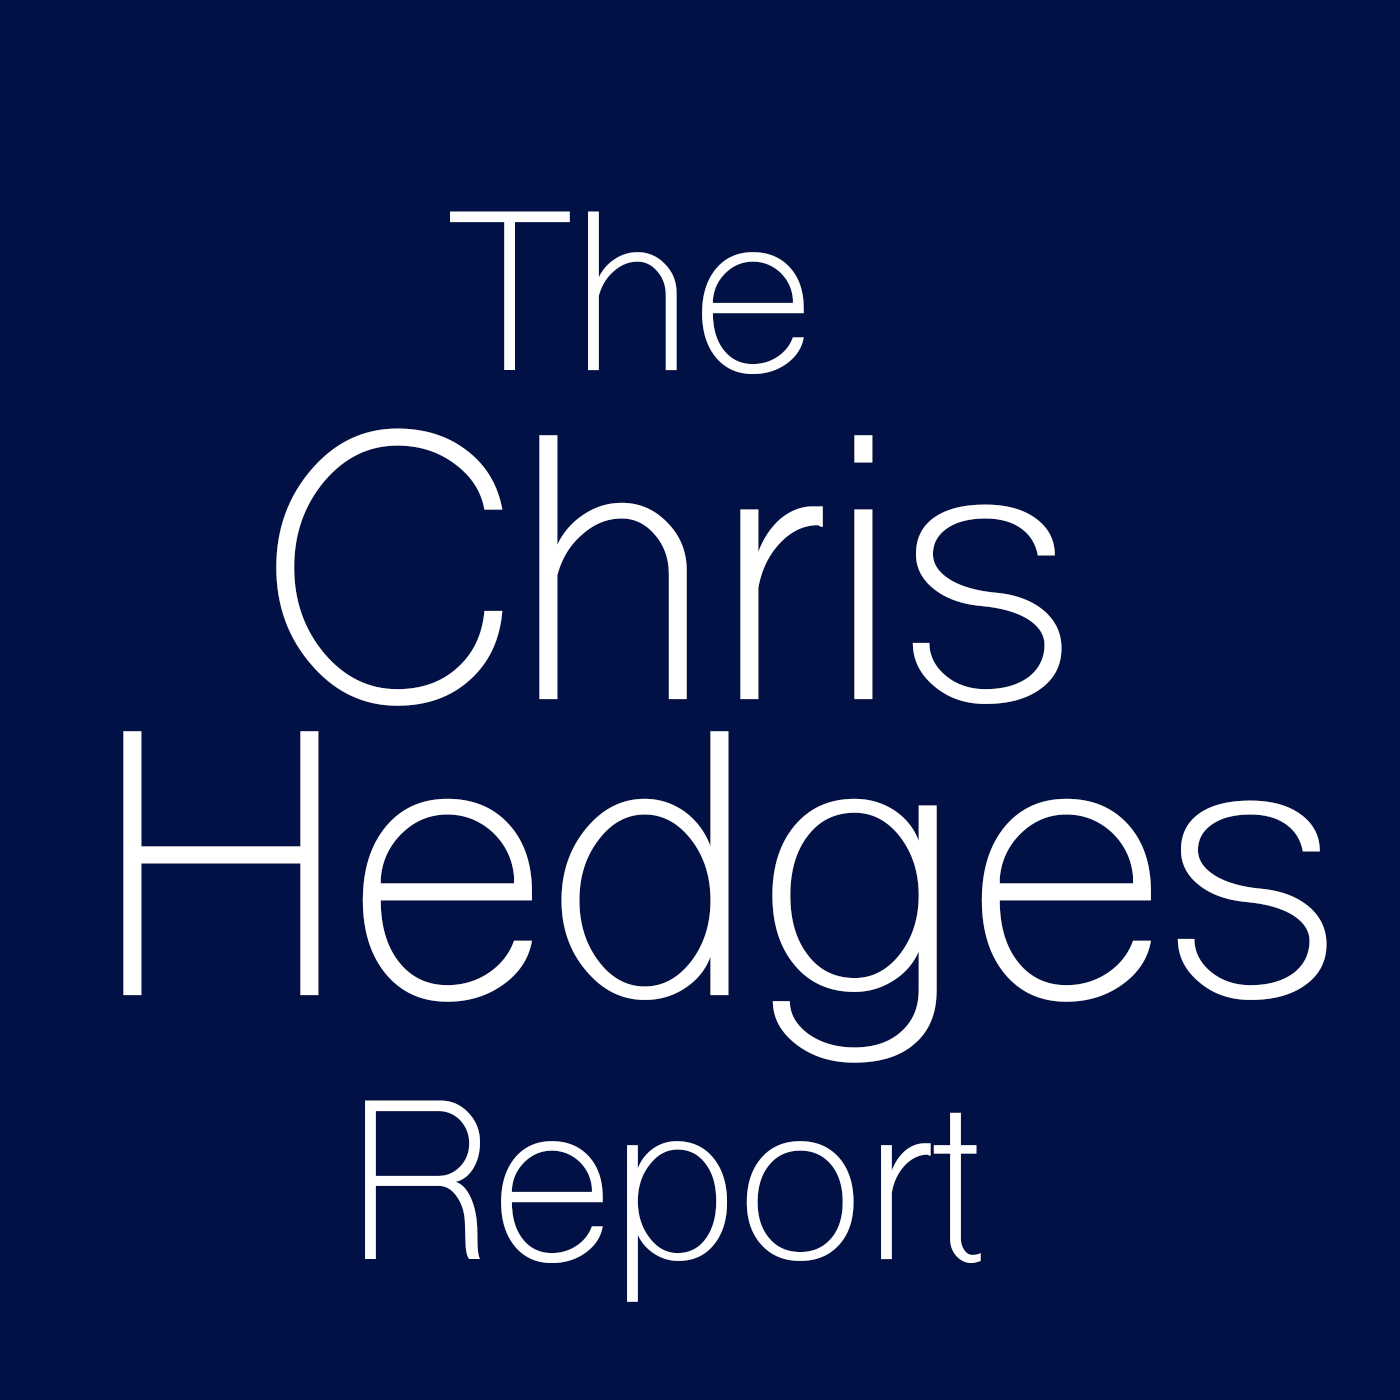 The Chris Hedges Report with Paola Caridi on the origins and aims of Hamas and why armed resistance against Israeli occupation is the only option most Palestinians have left.